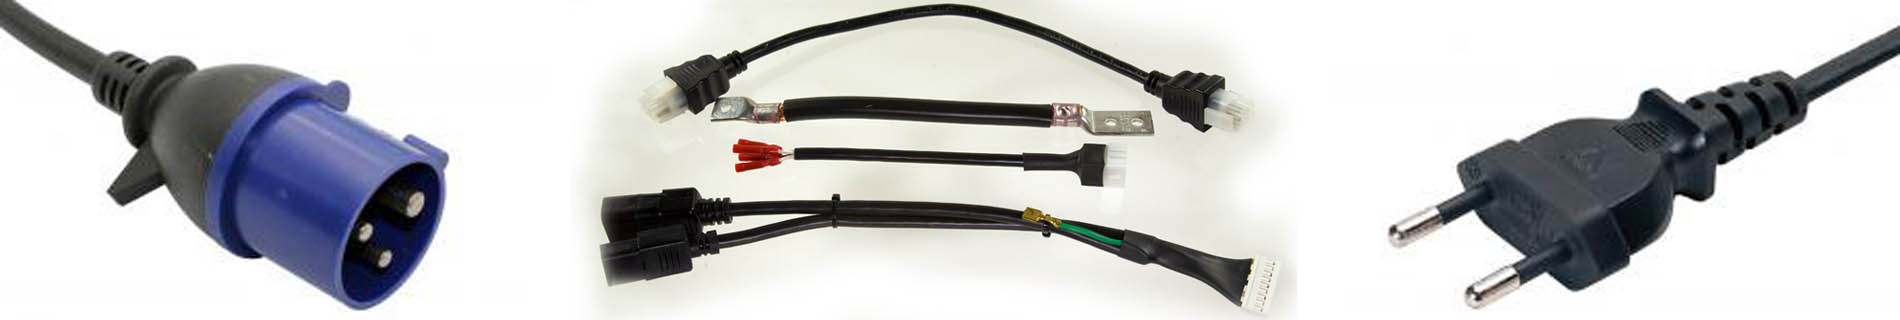 Electronic Connectors banner